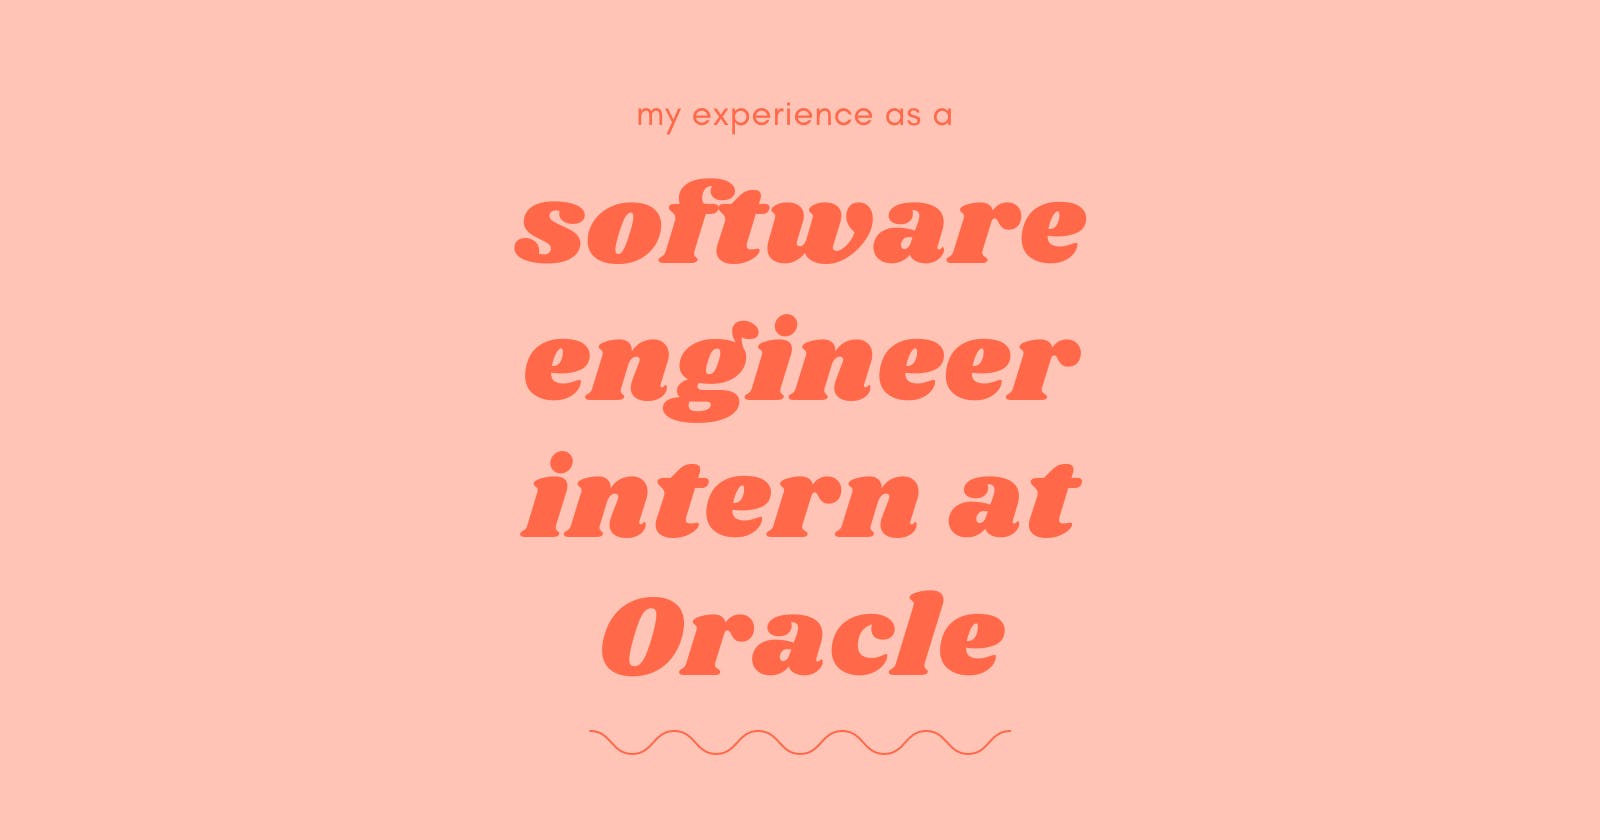 My Experience as a Software Engineer Intern at Oracle